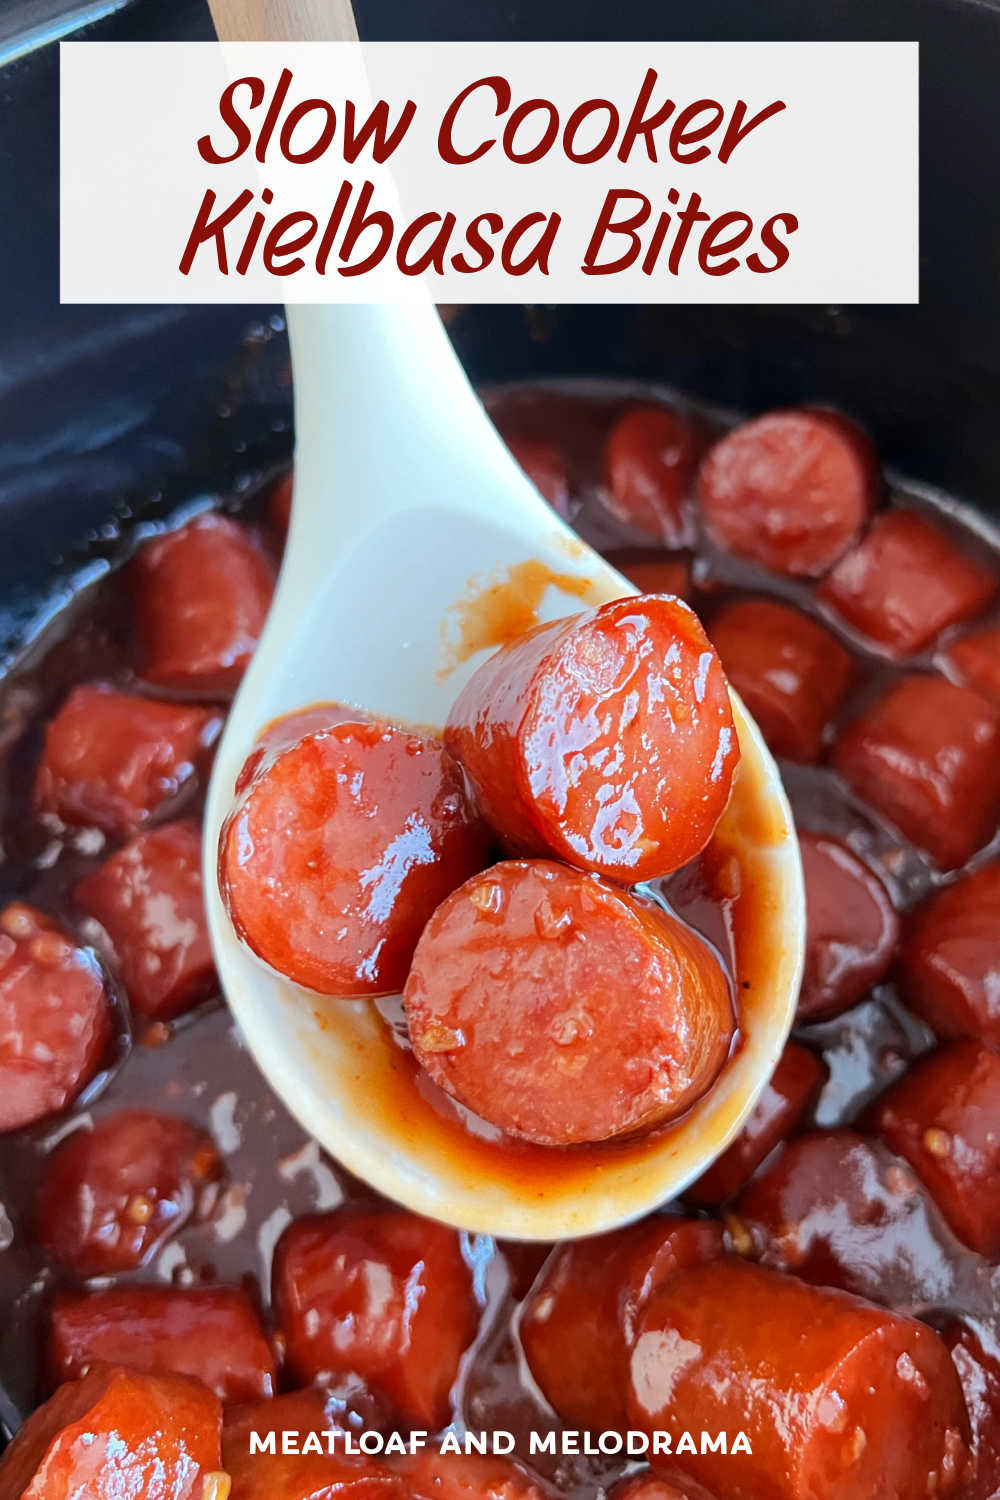 Slow Cooker Kielbasa Bites with BBQ sauce and brown sugar is an easy kielbasa recipe perfect for an easy appetizer or game day meal. A family favorite! via @meamel